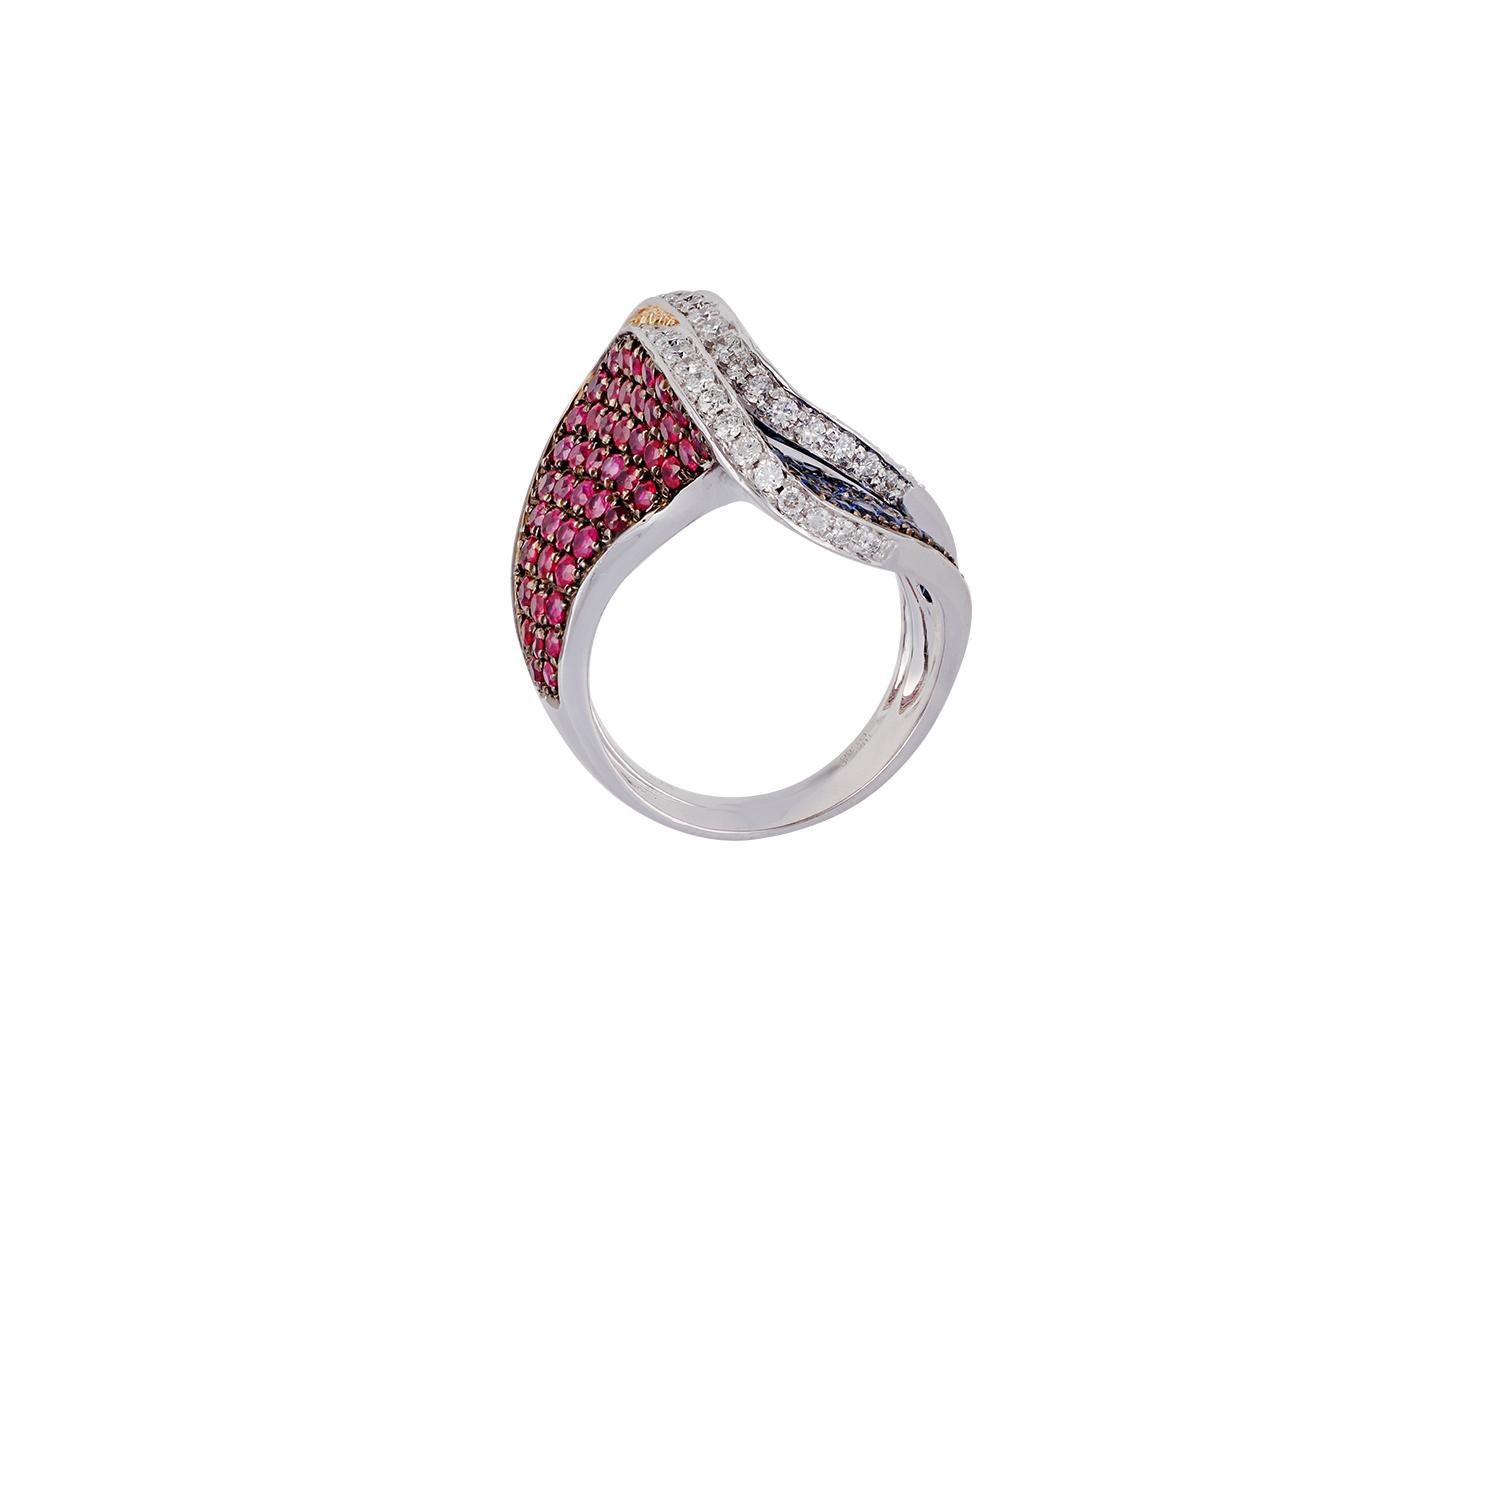 Contemporary Stackable Two-Piece Ruby, Sapphire, Diamond Ring, Set in 18 Karat White Gold